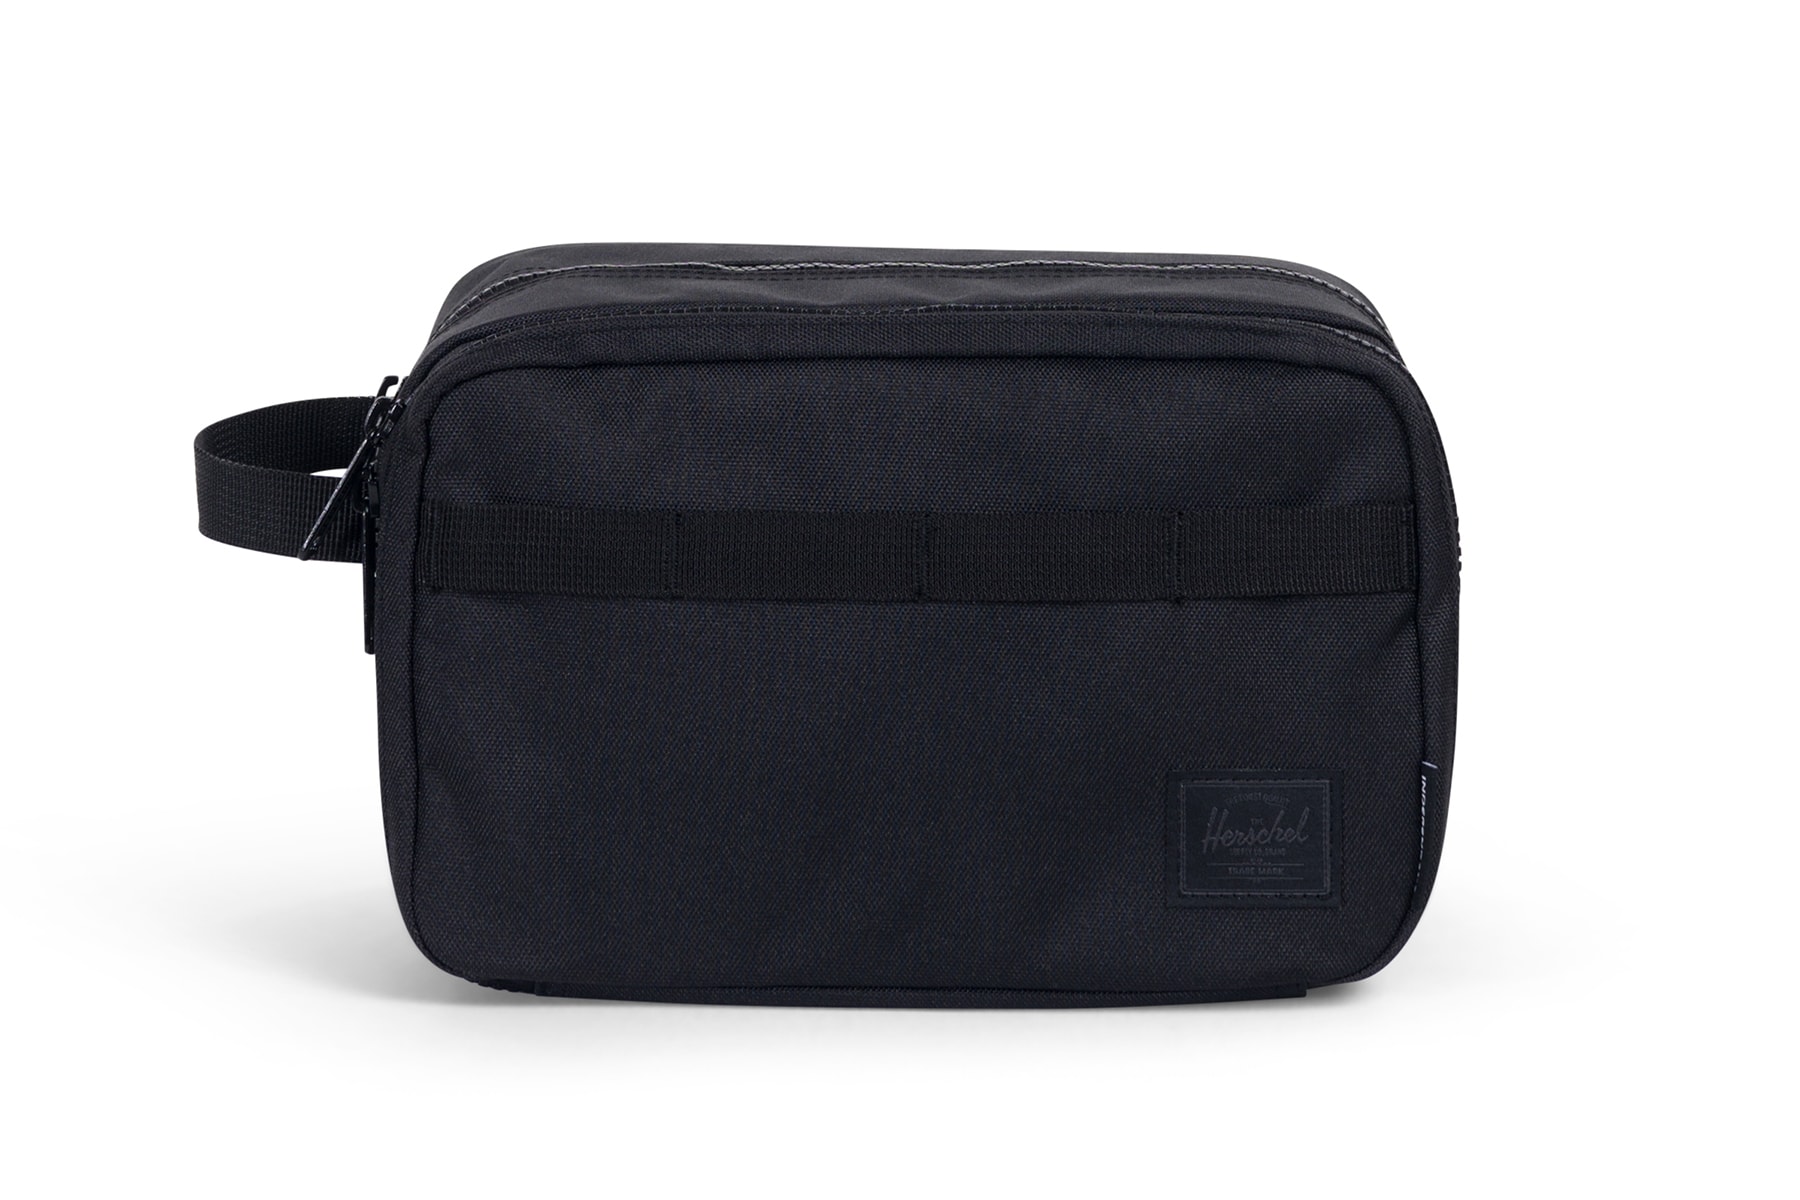 Herschel Supply Co independent truck company collaboration bag backpack daypack fall 2018 collection duffel tote shoulder fanny pack waist branding drop release date info buy purchase sale august 20